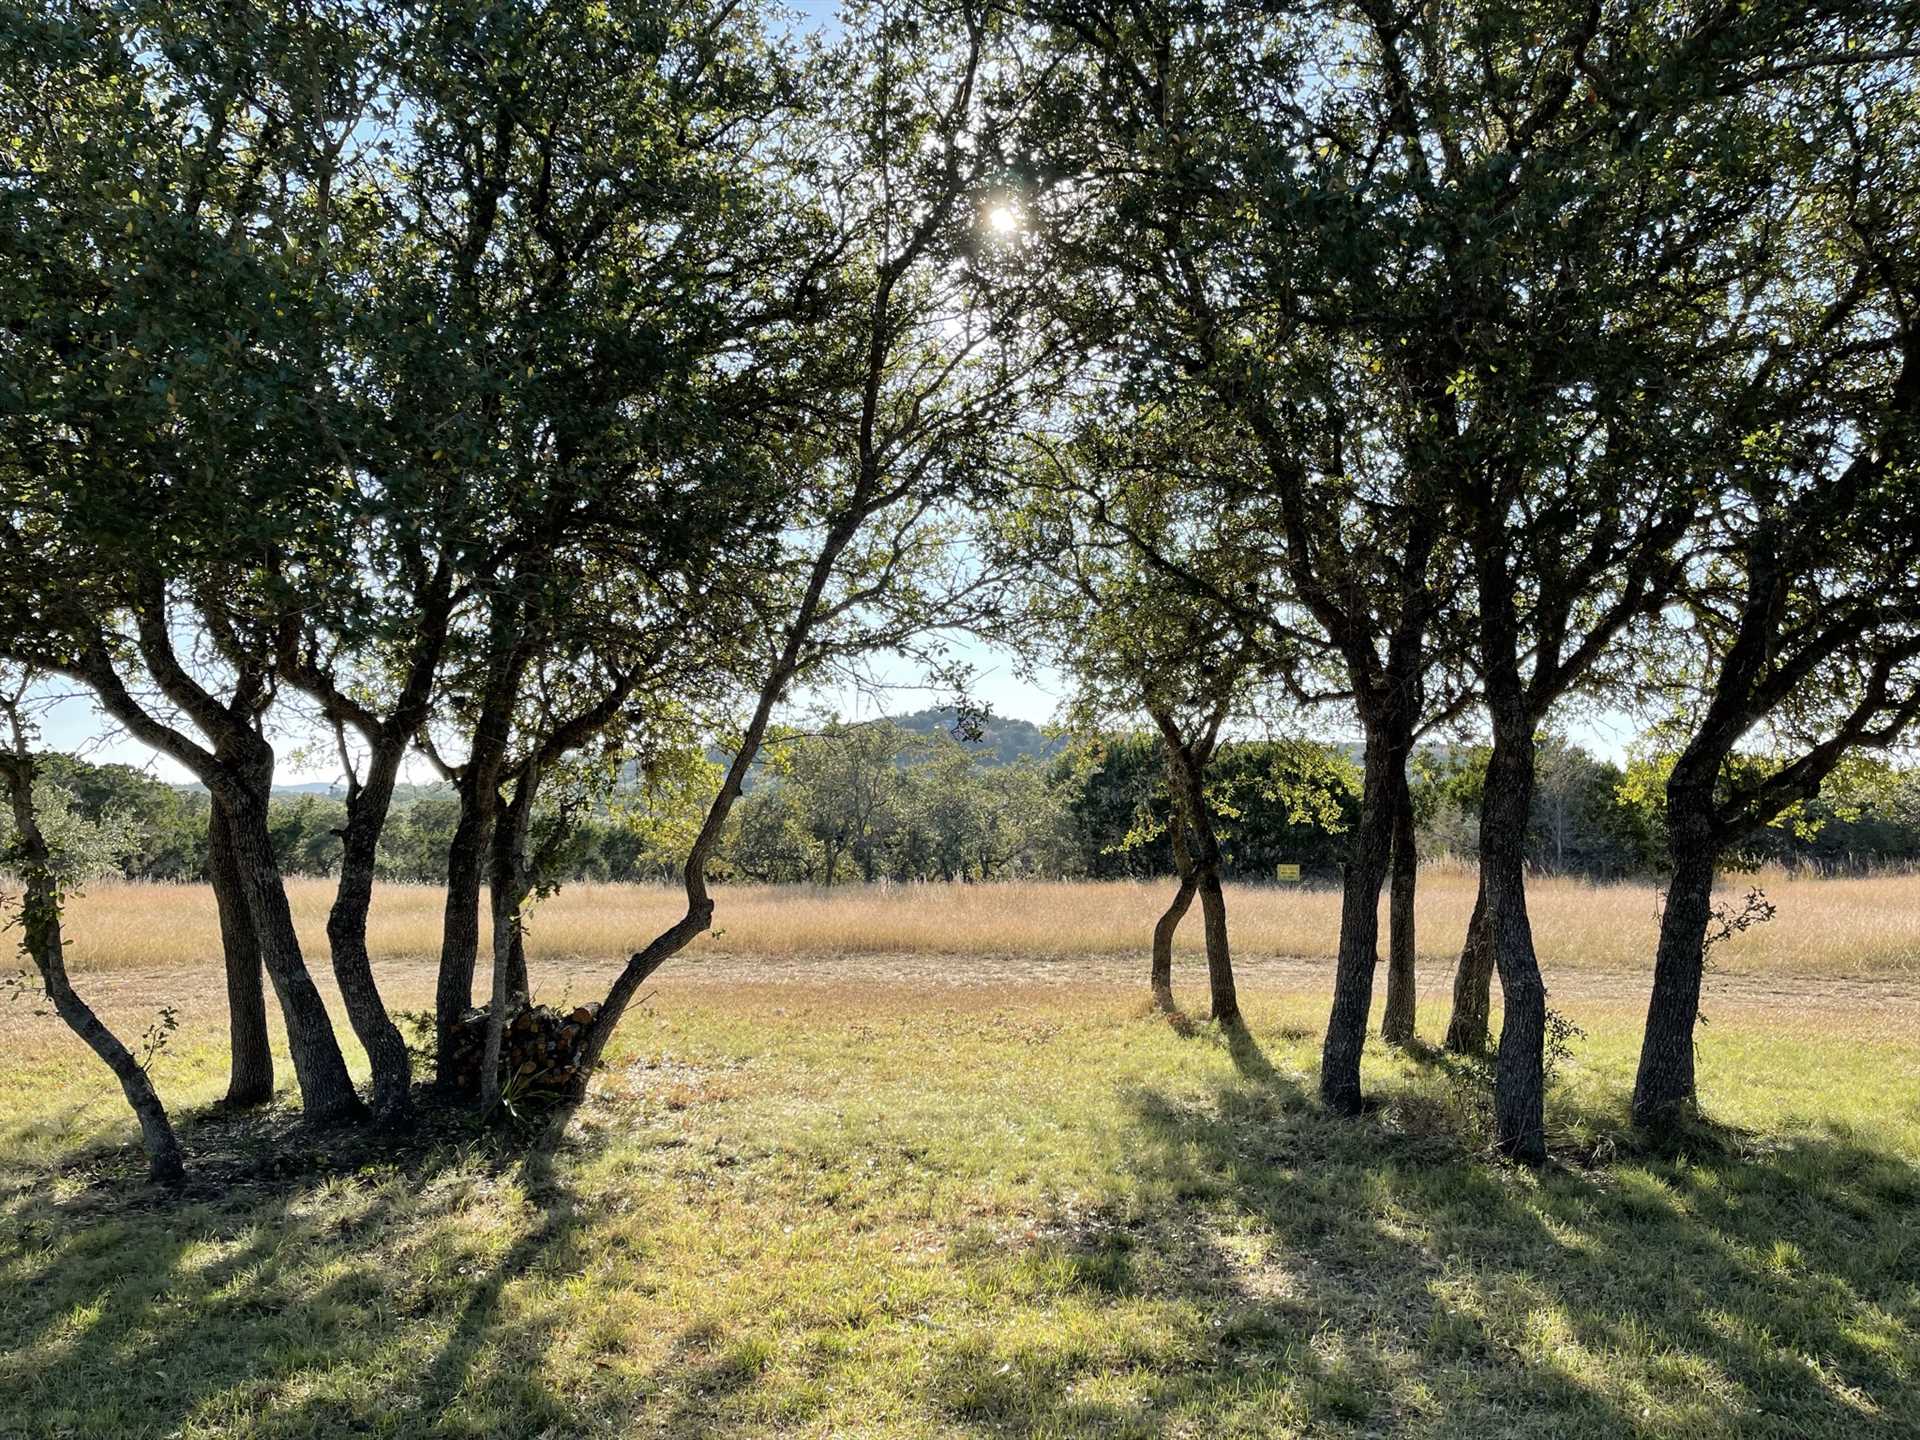                                                 The Great Heart Ranch is located on seven beautiful Hill Country acres that you're welcome to explore!